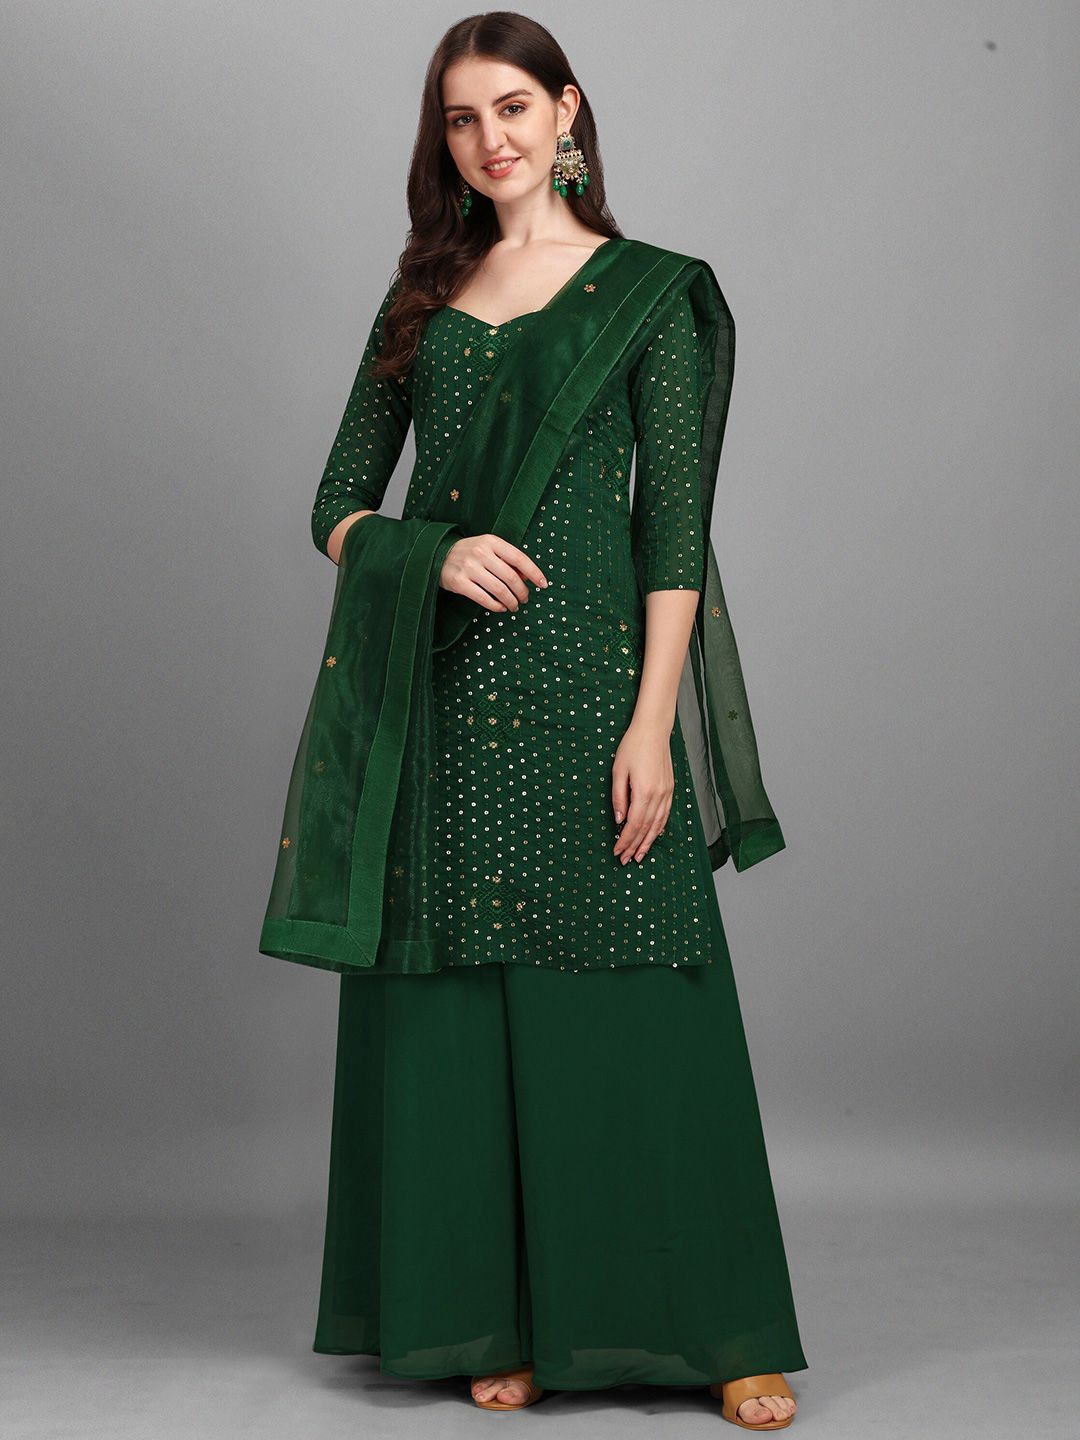 Ethnic Yard Women Green & Gold-Toned Embroidered Semi-Stitched Dress Material Price in India